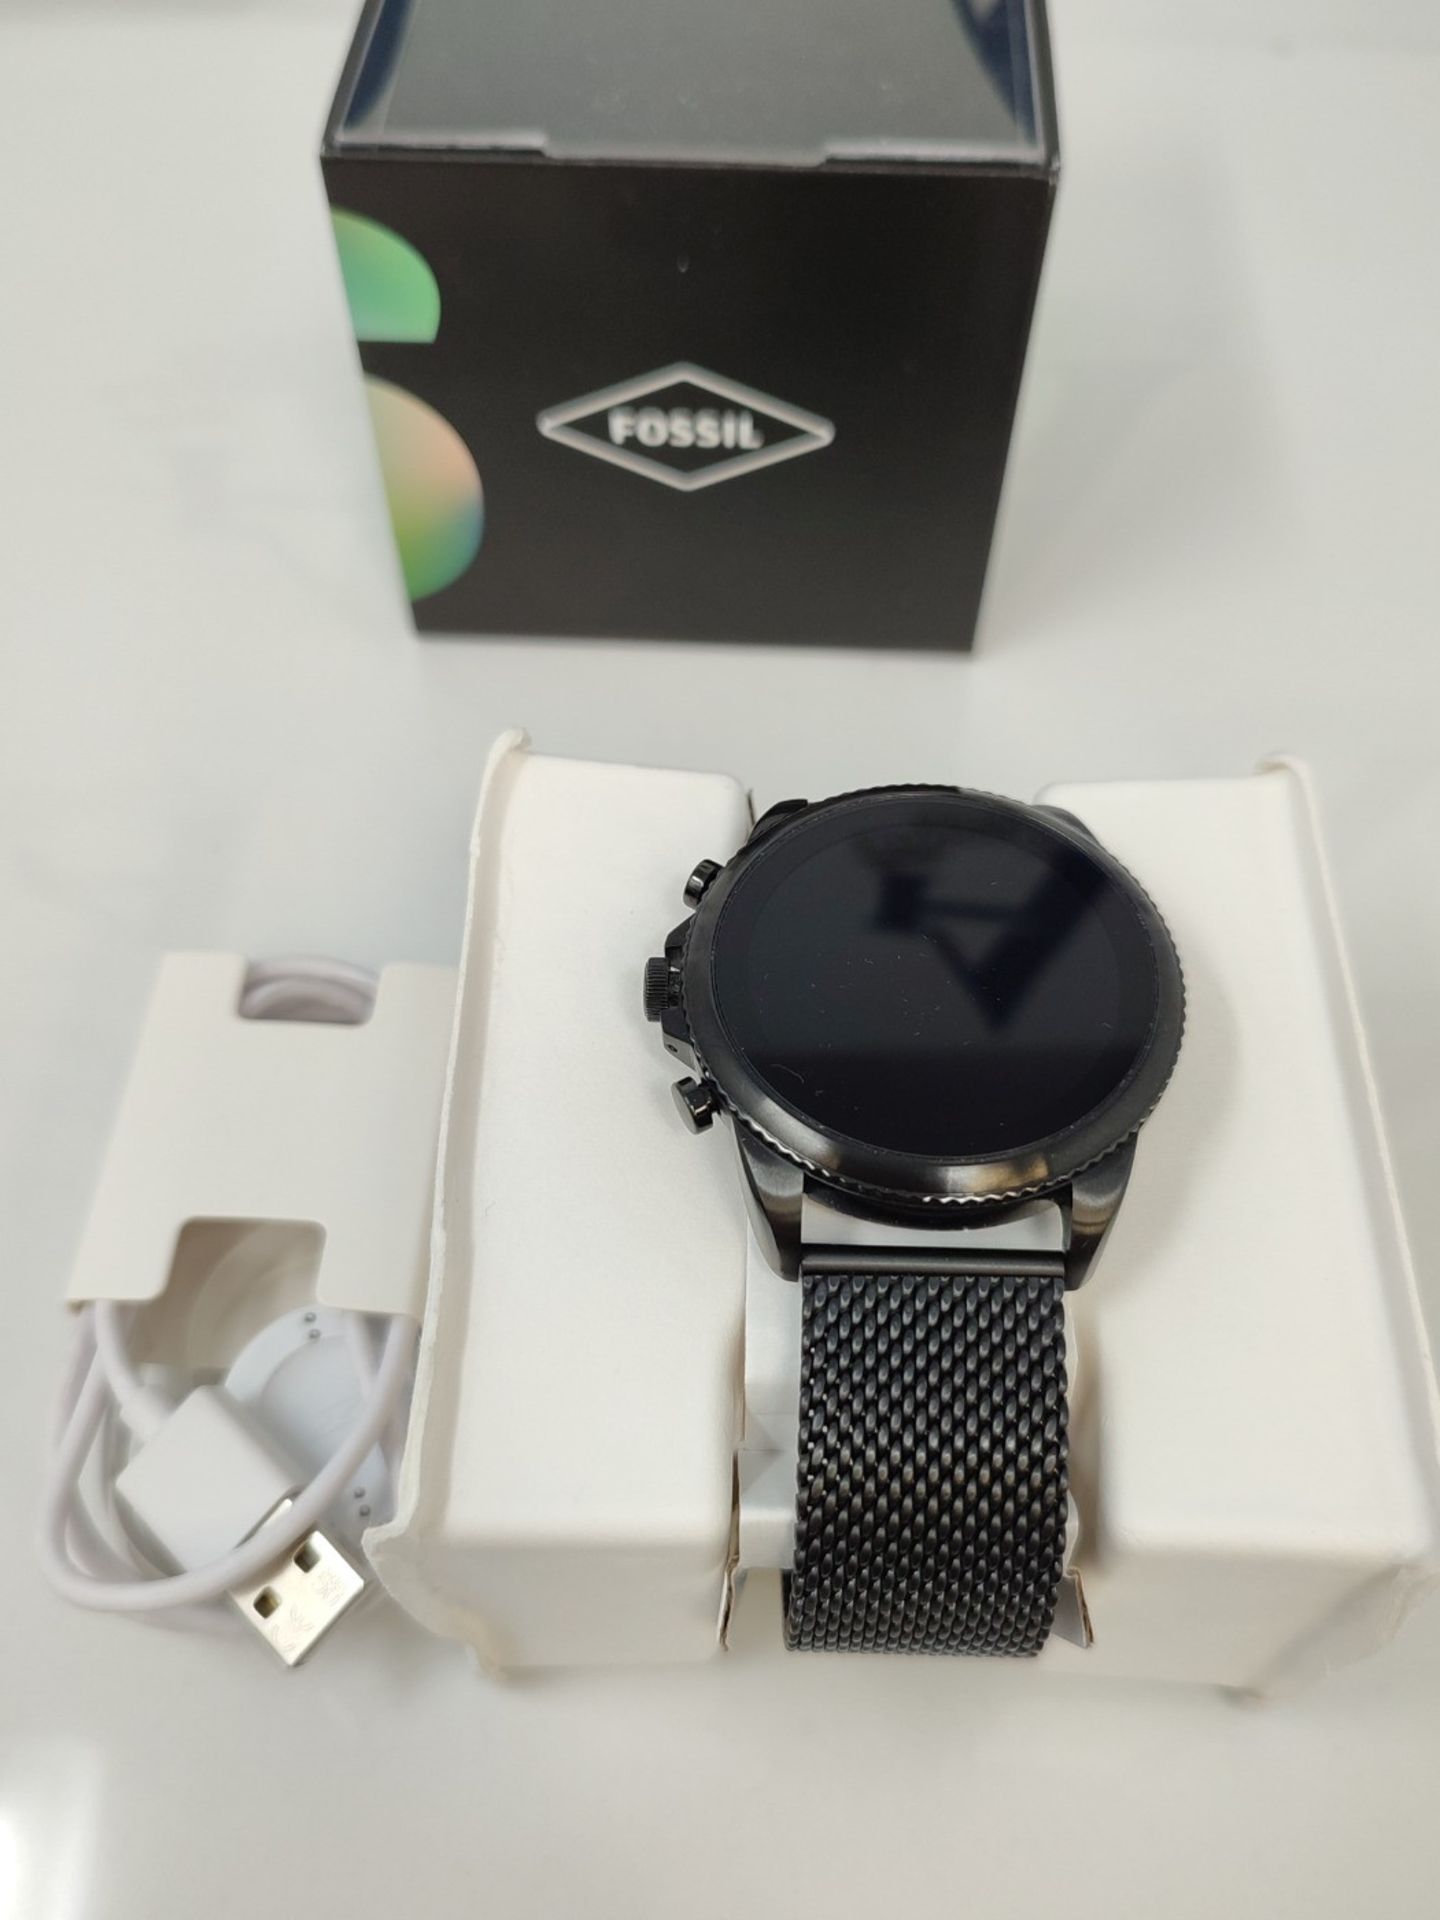 RRP £230.00 Fossil Men's Gen 6 smartwatch with speaker, heart rate, NFC, and smartphone alerts $FT - Image 5 of 6